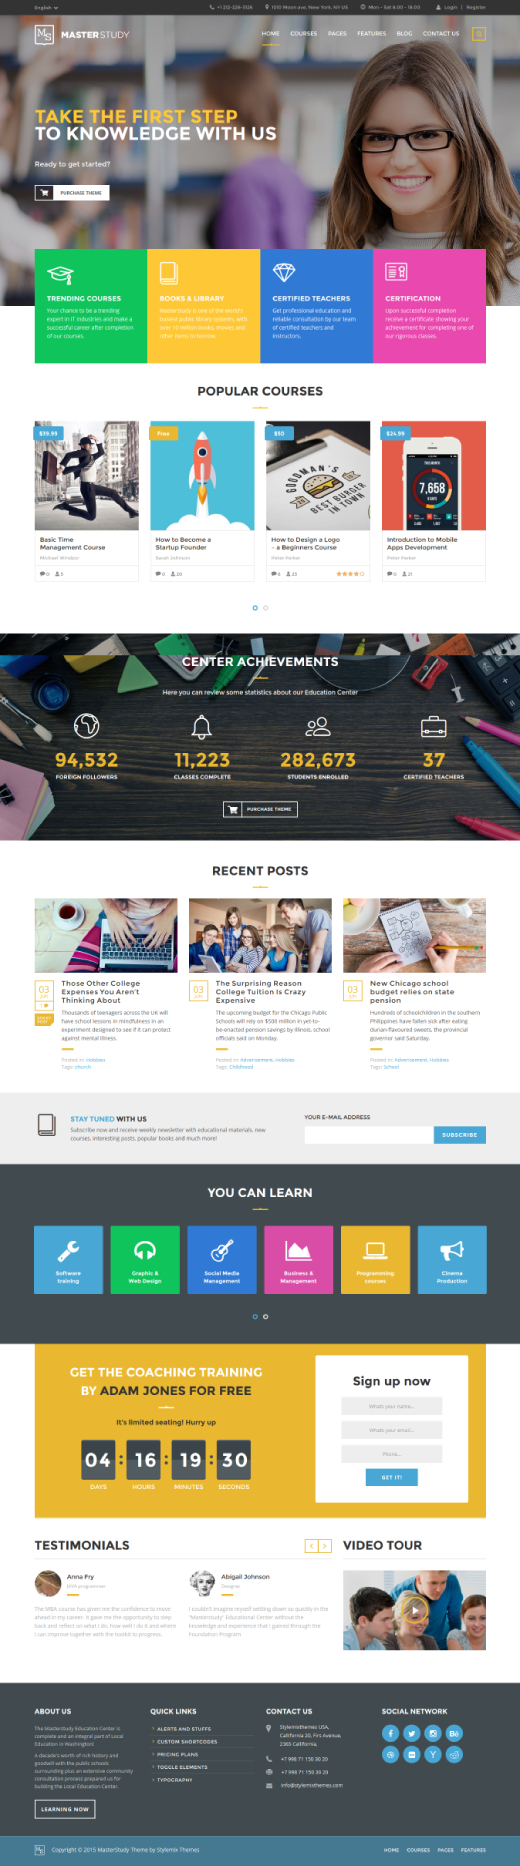 Masterstudy - Education WordPress Theme for Learning, Training and Education Center